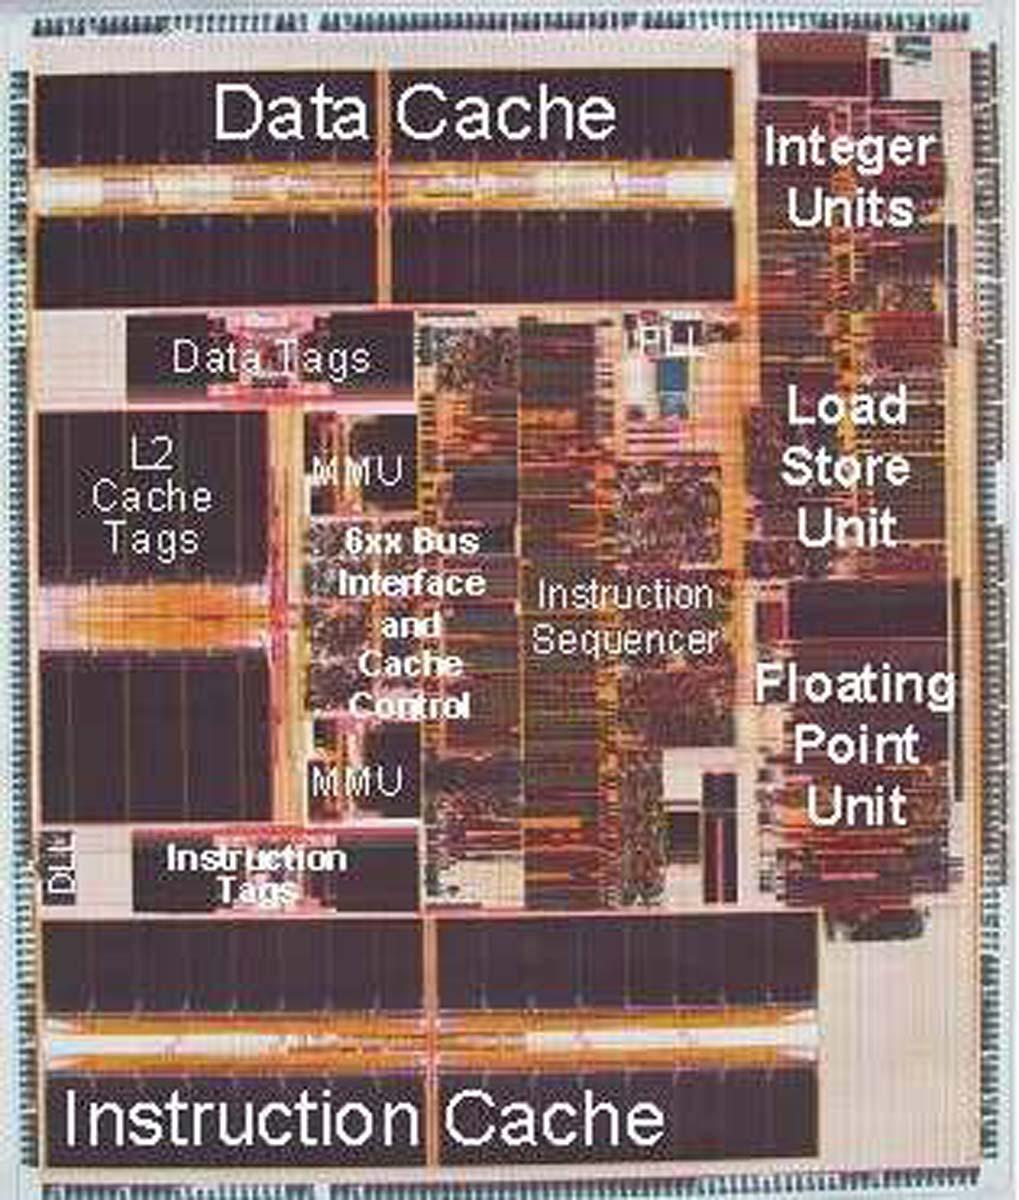 An actual CPU Early PowerPC Cache 32 KB Instructions and 32 KB Data L1 caches External L2 Cache interface with integrated controller and cache tags, supports up to 1 MByte external L2